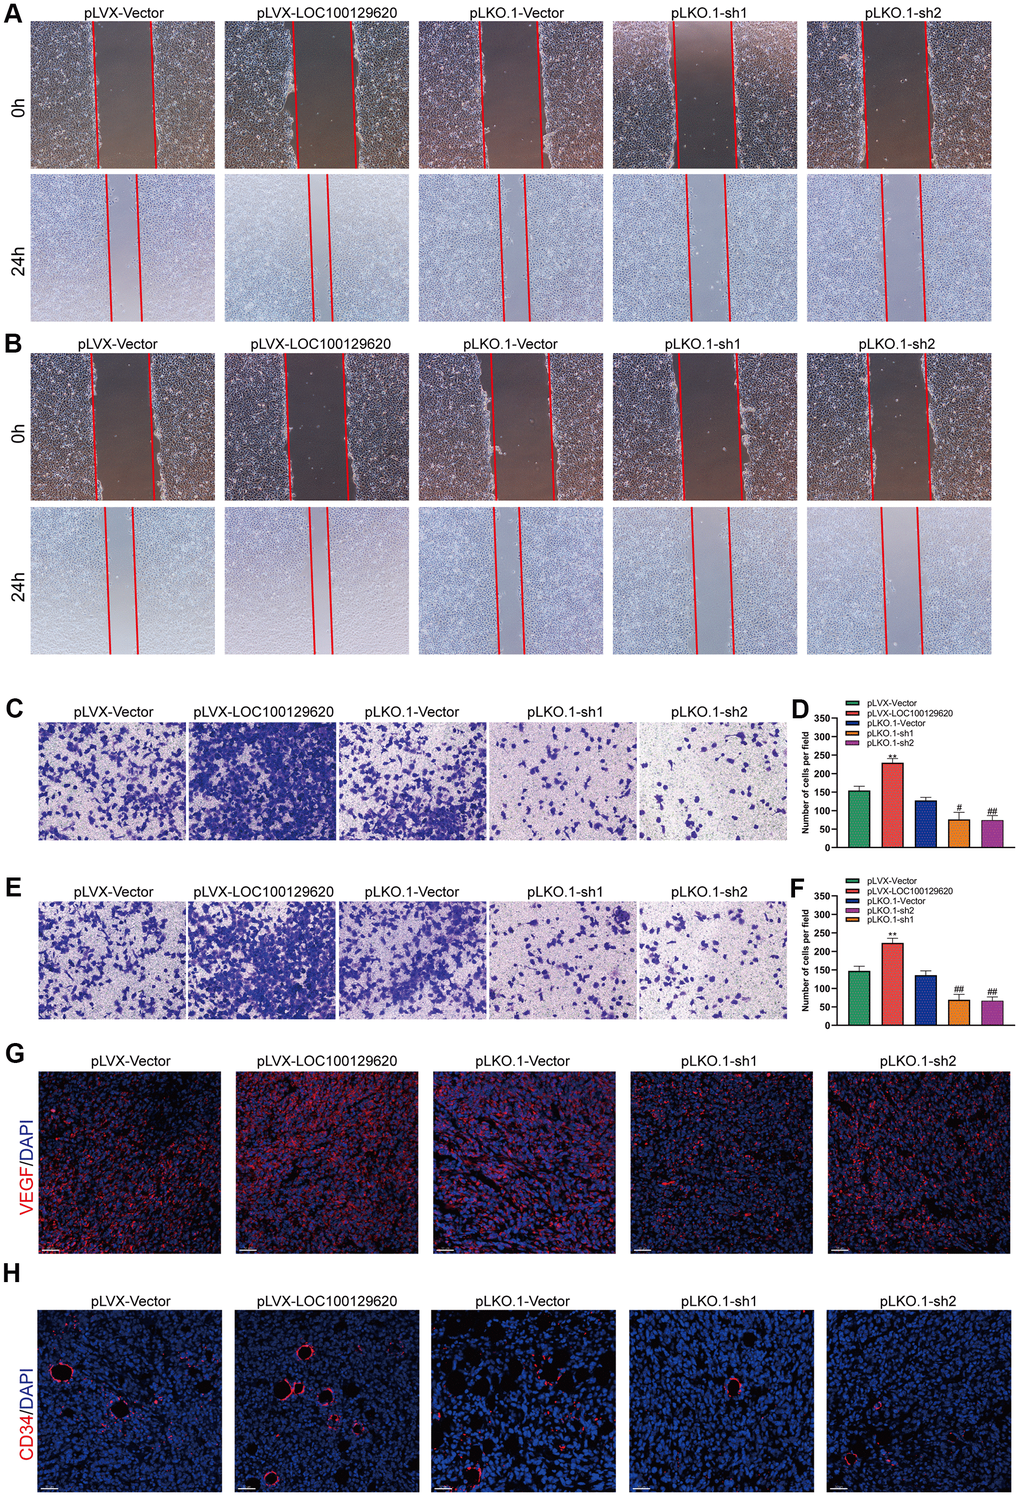 LncRNA LOC100129620 regulates osteosarcoma-induced angiogenesis. (A) Cell scratch assay to detect the migration ability of HUVECs treated with cell culture supernatant from U2OS cells with LOC100129620 overexpression or knockdown. (B) Cell scratch assay to detect the migration ability of HUVECs treated with cell culture supernatant isolated from MG63 cells with LOC100129620 overexpression or knockdown. (C) Transwell assay to detect the invasion ability of HUVECs treated with cell culture supernatant isolated from U2OS cells with LOC100129620 overexpression or knockdown. (D) Quantitative analysis of the Transwell assay results of HUVECs treated with cell culture supernatant isolated from U2OS cells with LOC100129620 overexpression or knockdown. (E) Transwell assay to detect the invasion ability of HUVECs treated with cell culture supernatant isolated from MG63 cells with LOC100129620 overexpression or knockdown. (F) Quantitative analysis of the Transwell assay results of HUVECs treated with cell culture supernatant isolated from MG63 cells with LOC100129620 overexpression or knockdown. Statistical analysis was conducted using Student’s t-test. (G) Immunofluorescence analysis to detect the expression of VEGF in xenograft tumor. (H) Immunofluorescence analysis to detect the expression of CD34 in xenograft tumor. Values are means ± SD. **P ##P 